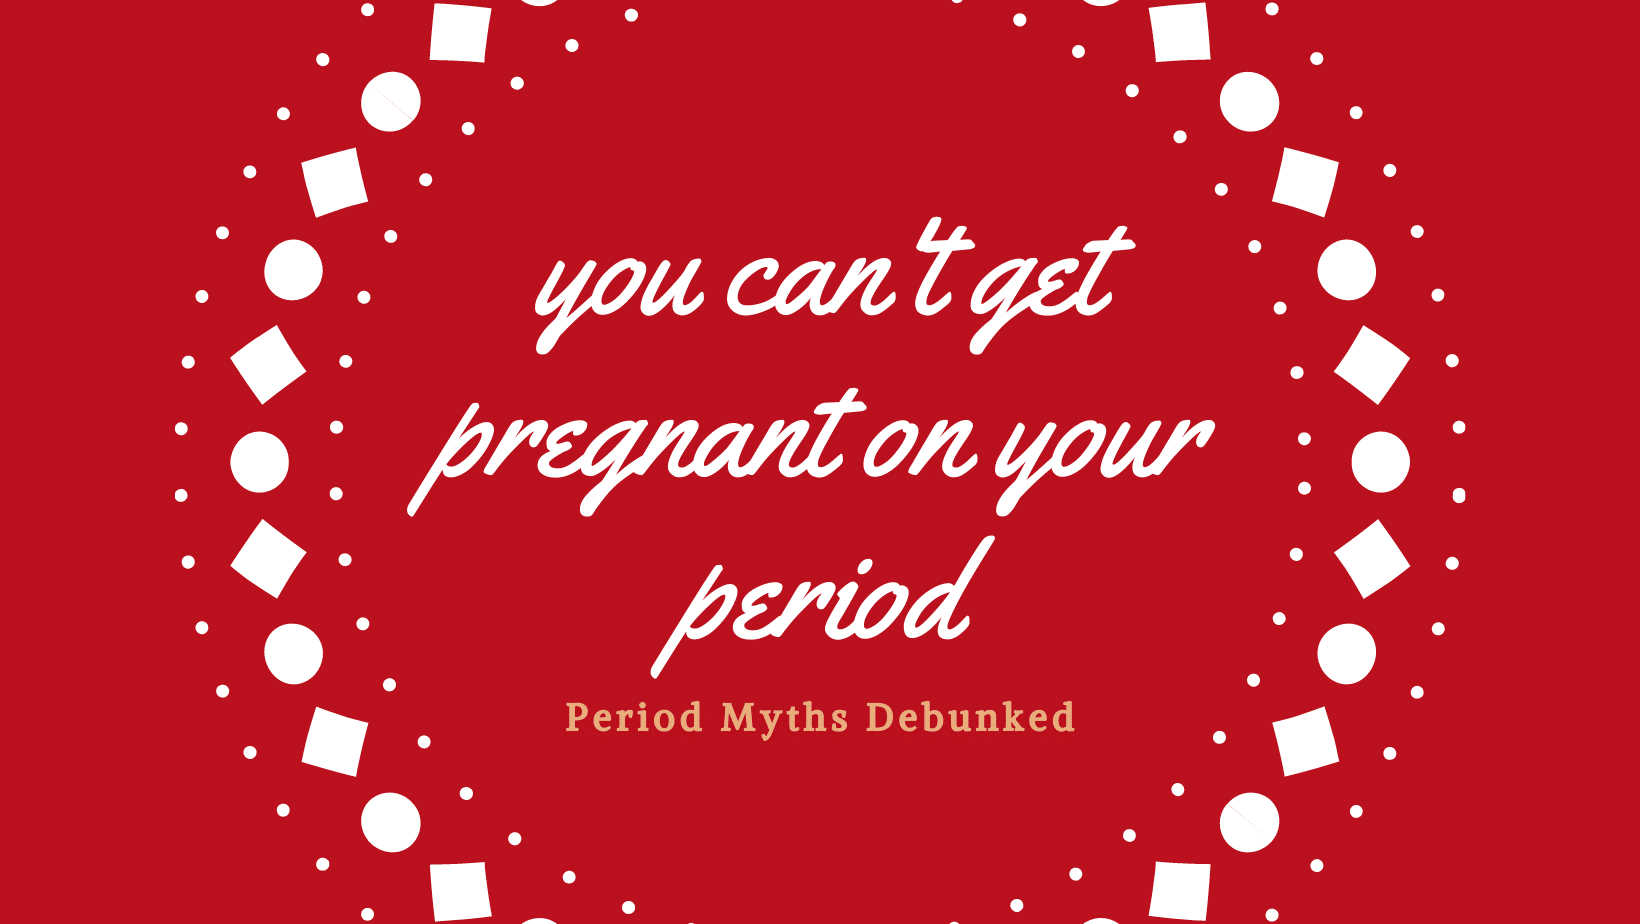 Graphic about debunking period myths that you can't get pregnant on your period.